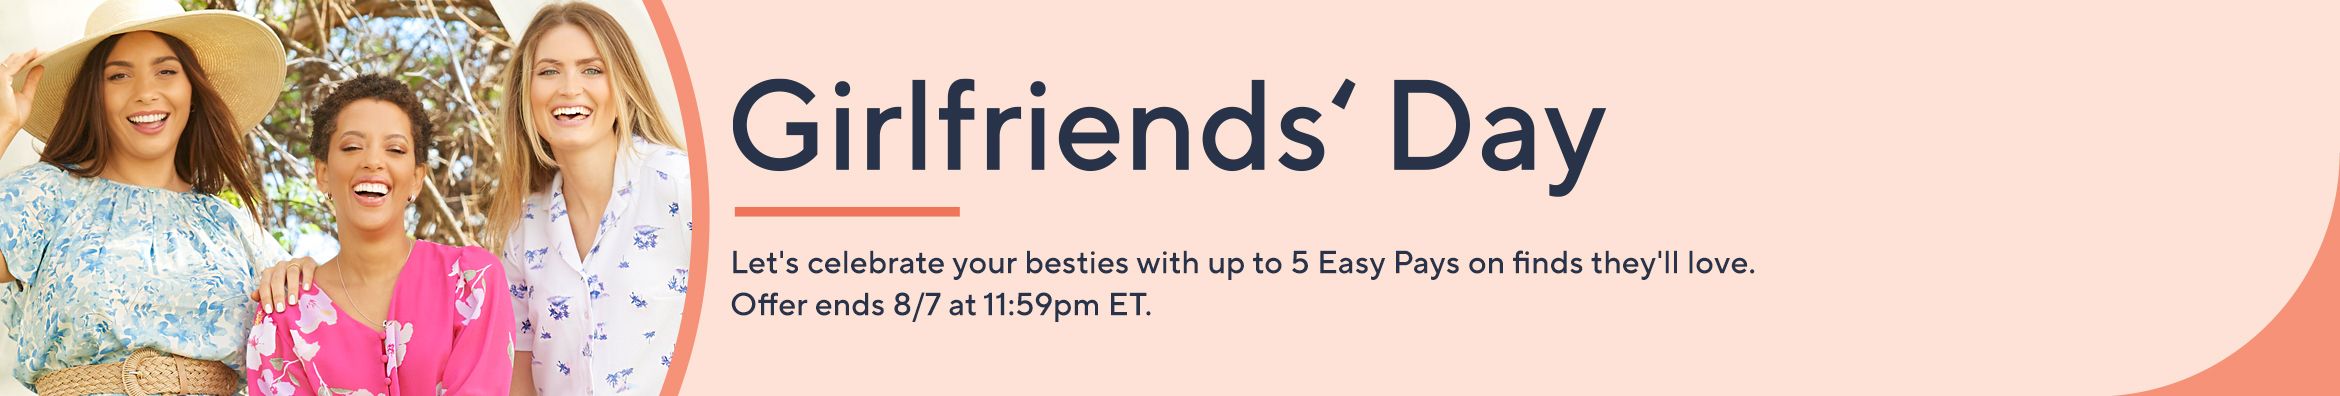 Girlfriends' Day: Let's celebrate your besties with up to 5 Easy Pays on finds they'll love. Offer ends 8/7 at 11:59pm ET. 